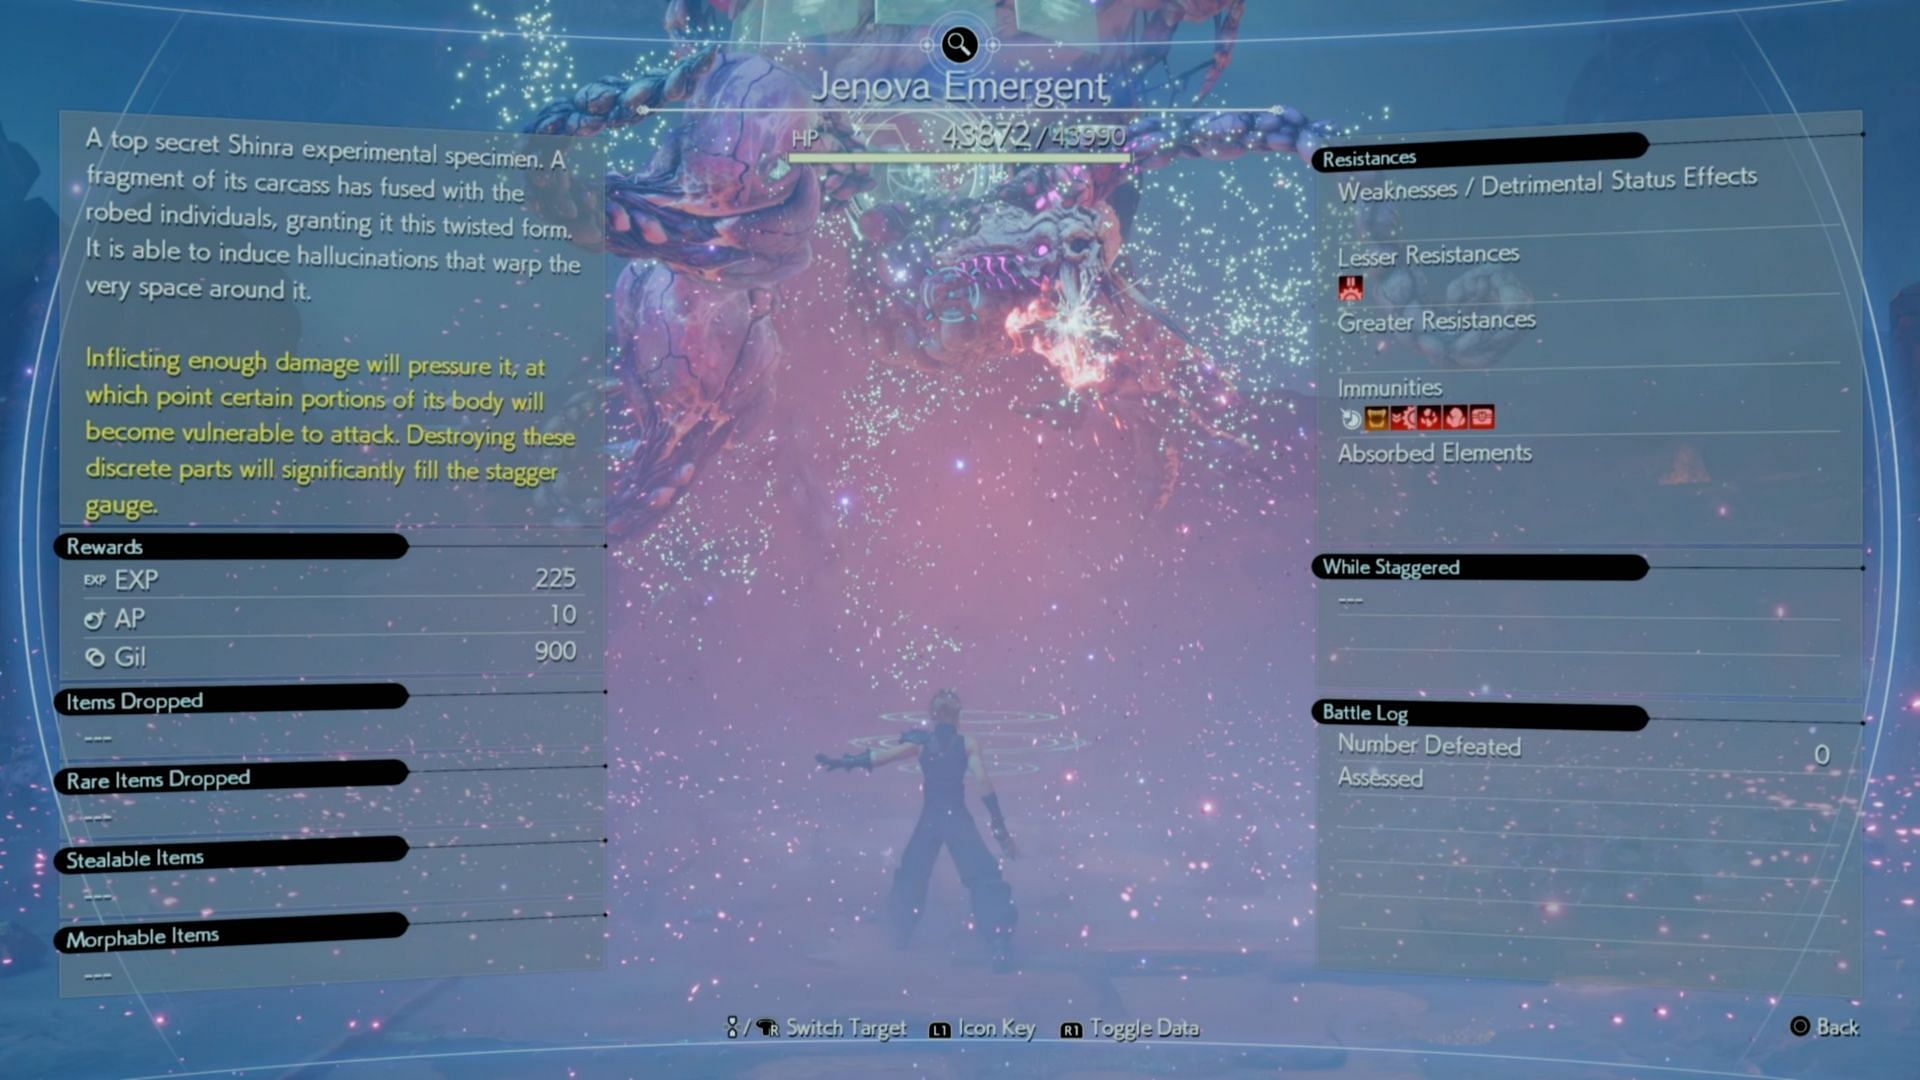 This is the Assess screen for Jenova Emergent (Image via Square Enix)